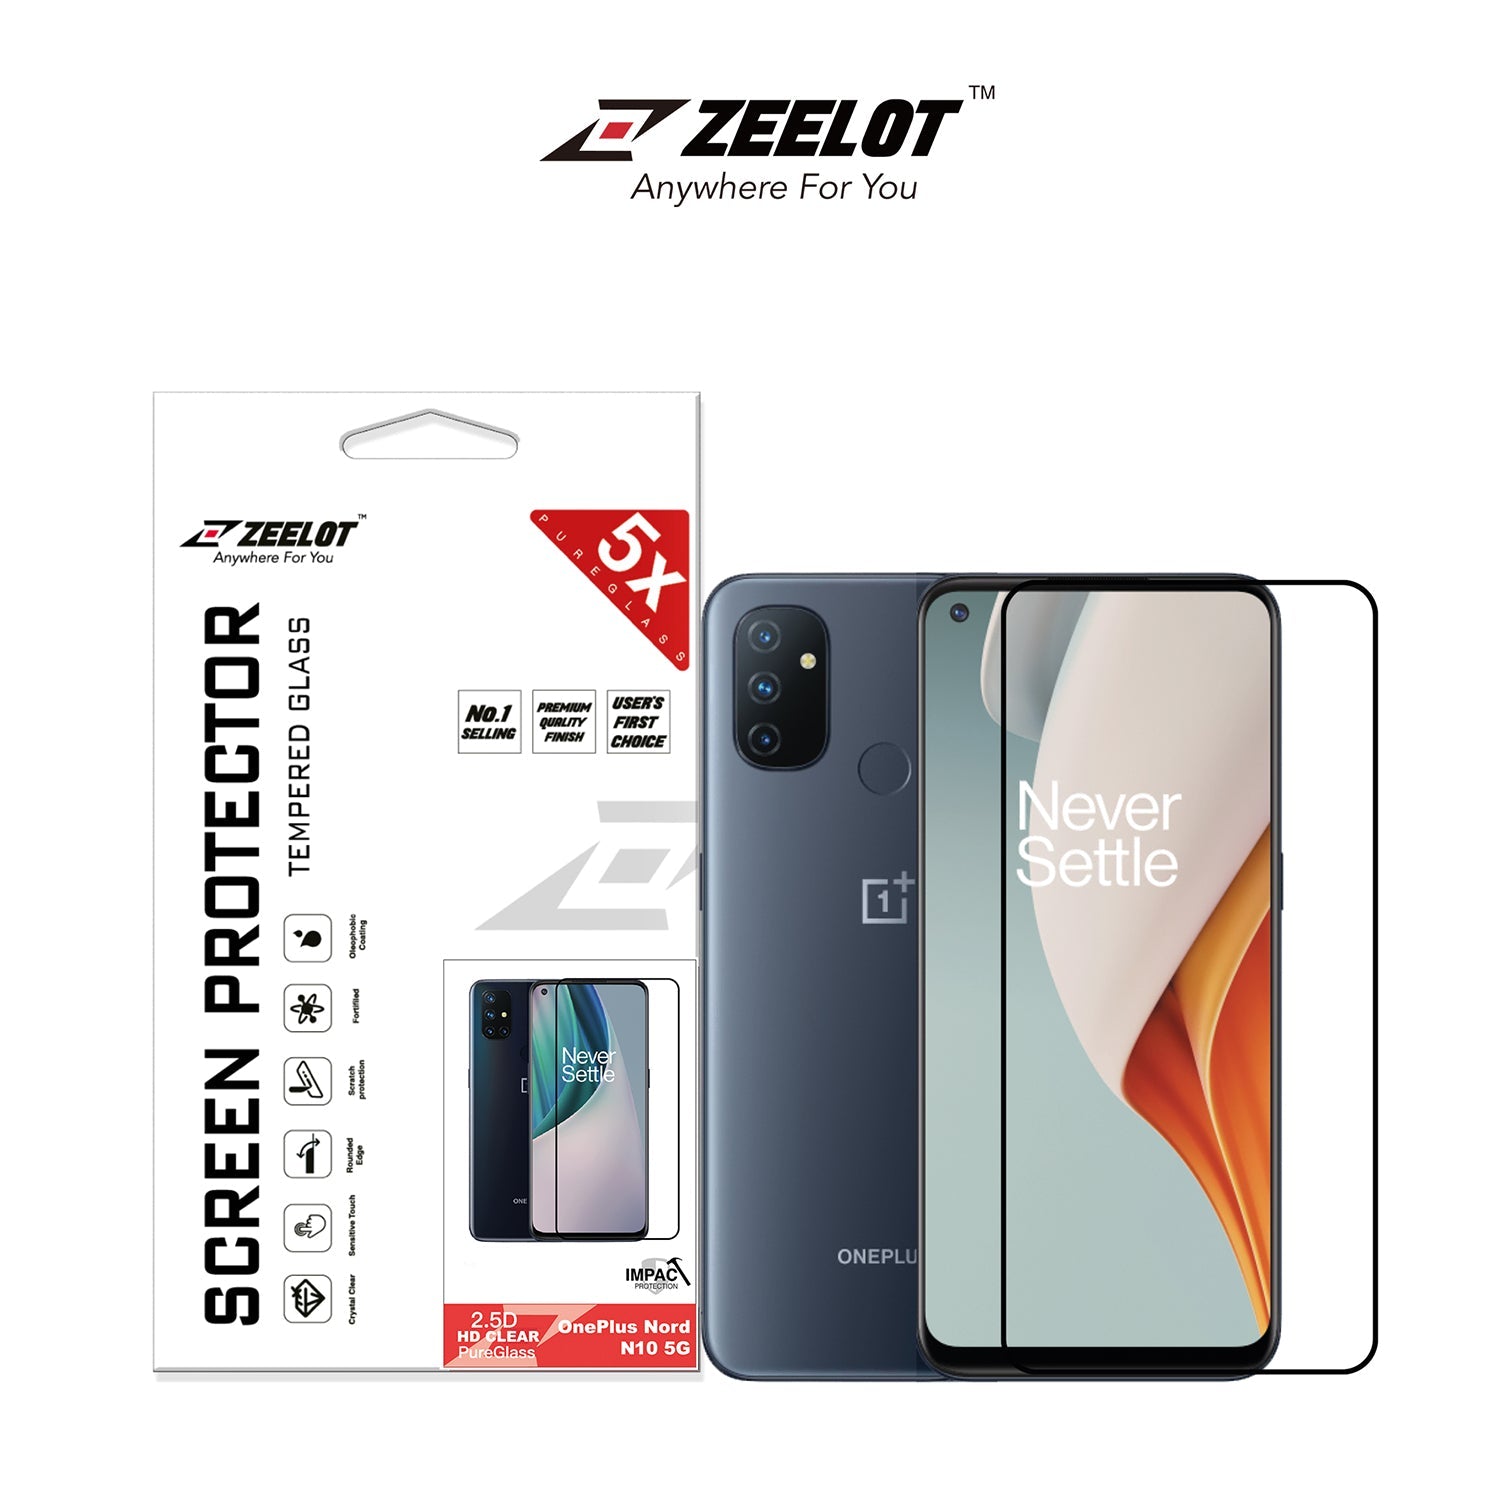 ZEELOT PureGlass 2.5D Tempered Glass Screen Protector for OnePlus Nord N10, Clear Tempered Glass ZEELOT Clear 